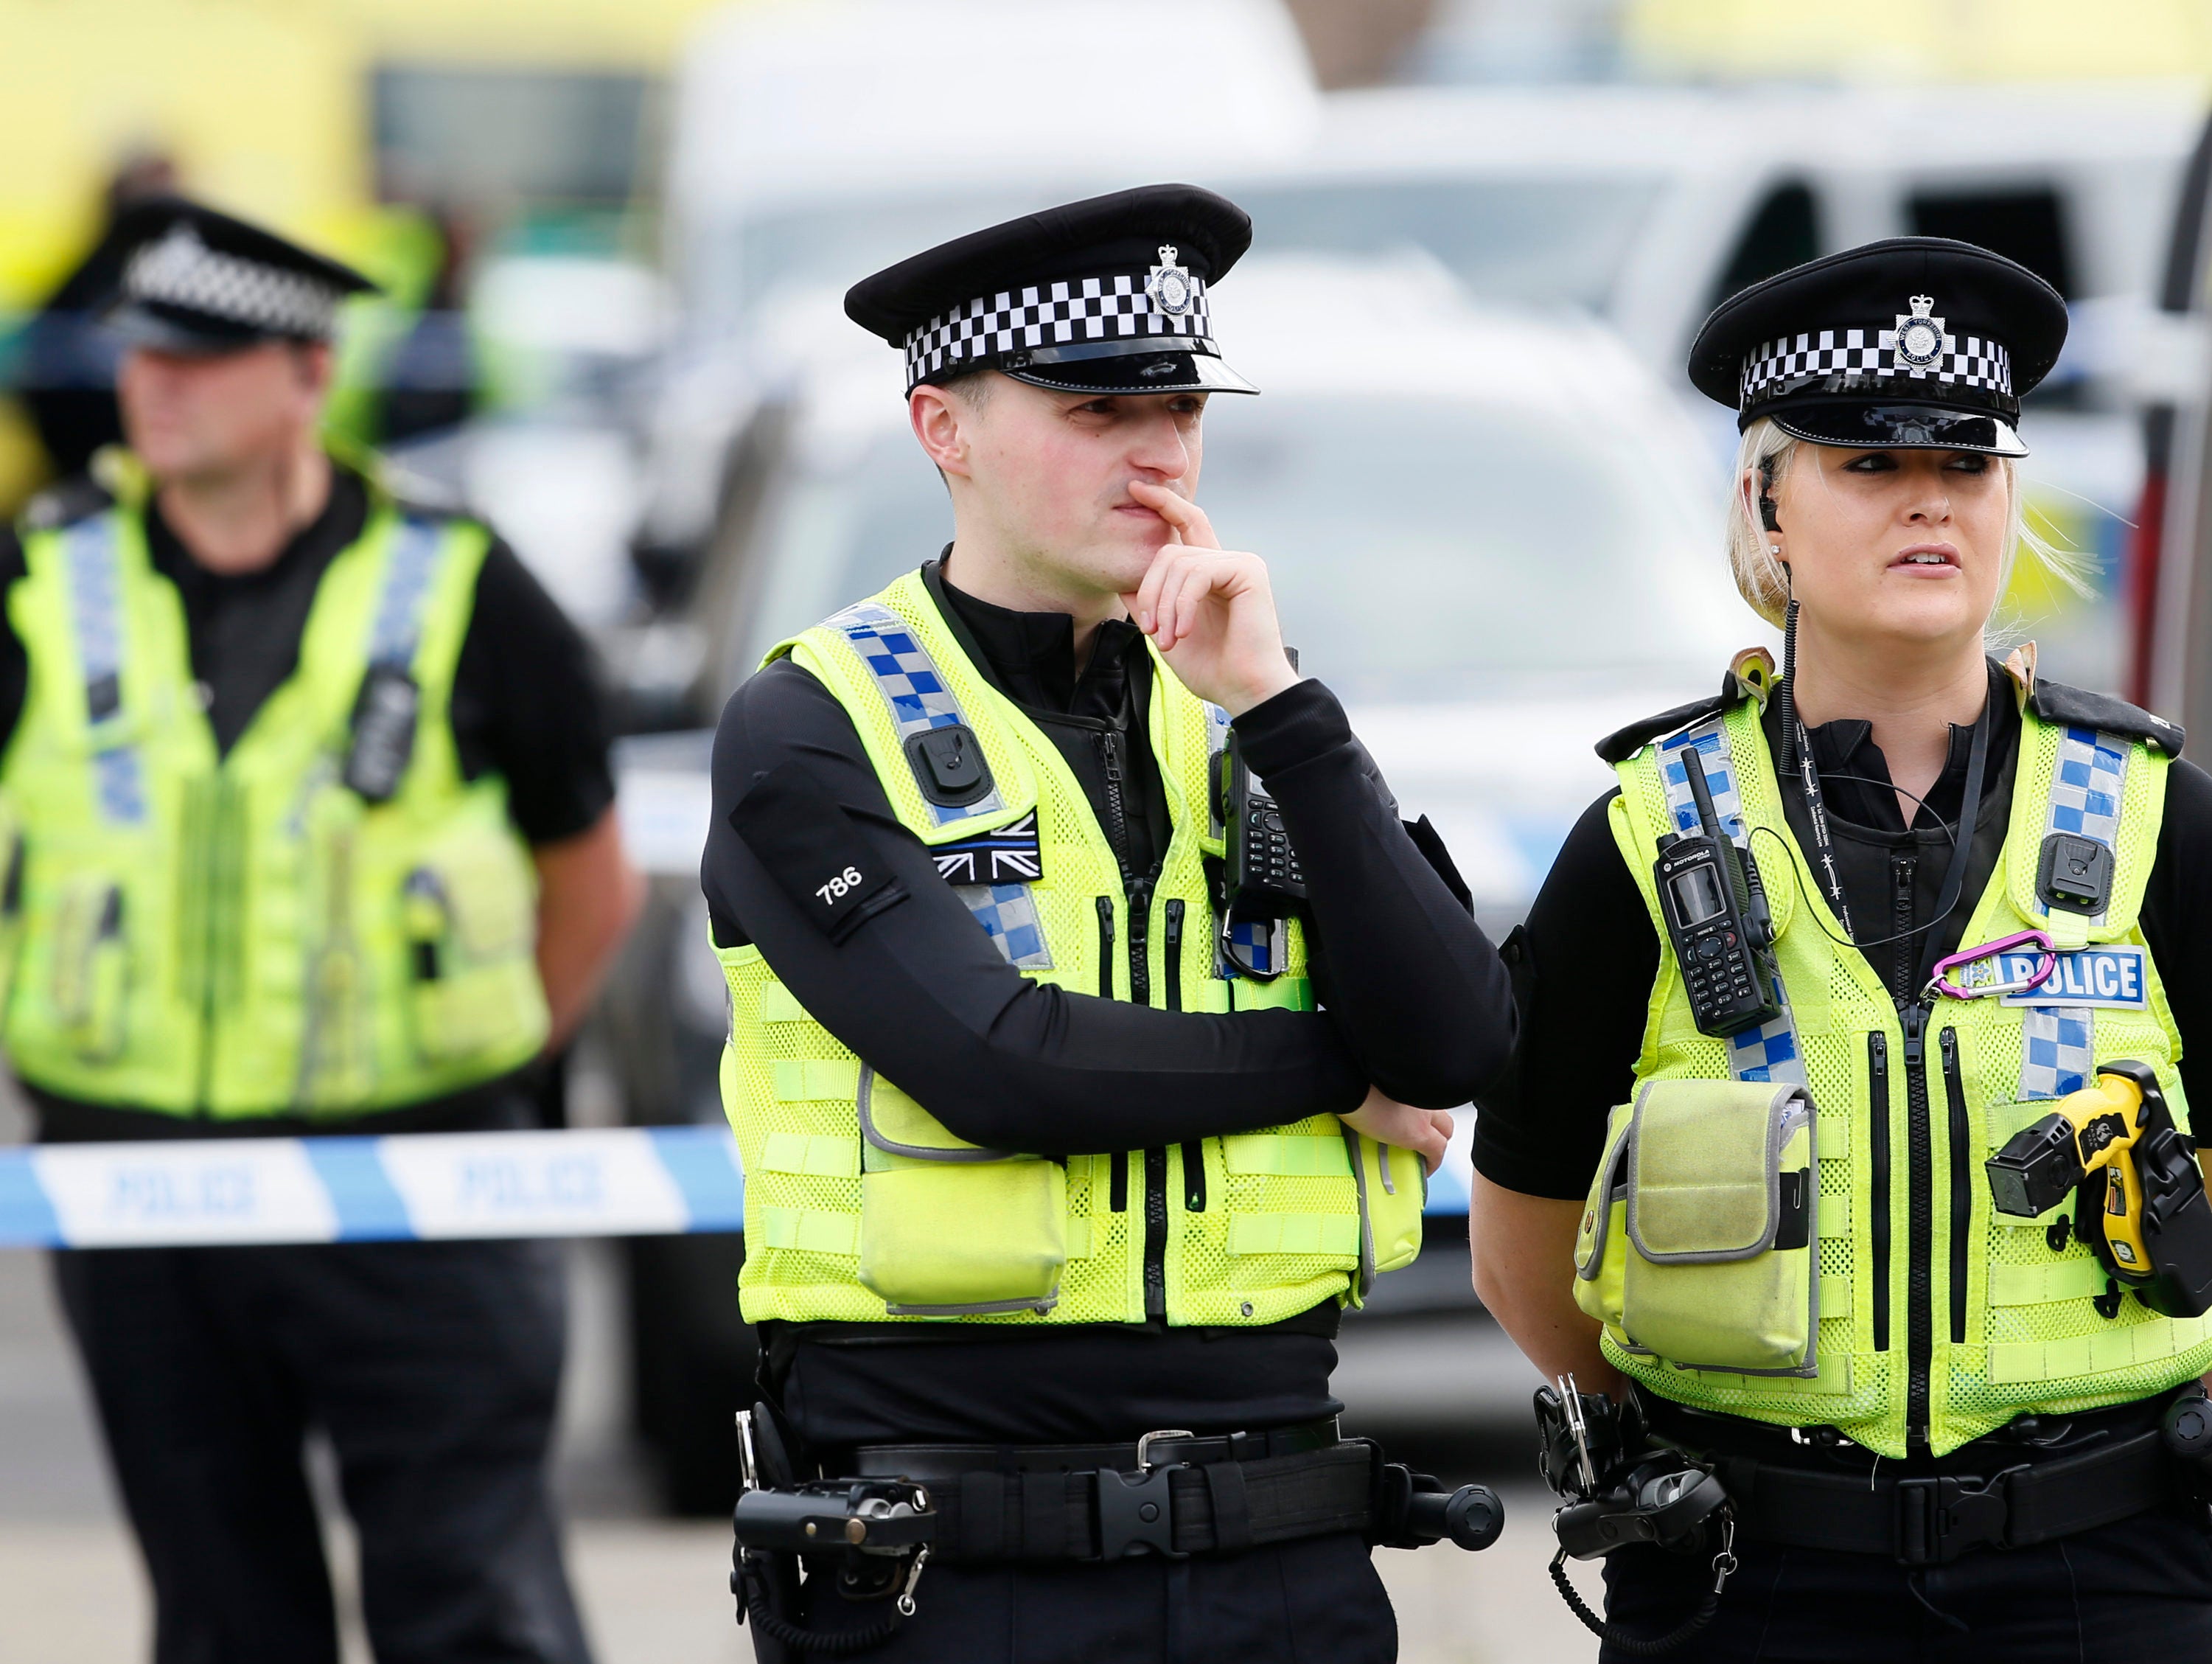 Key highlights from updated police guidance on working with the media